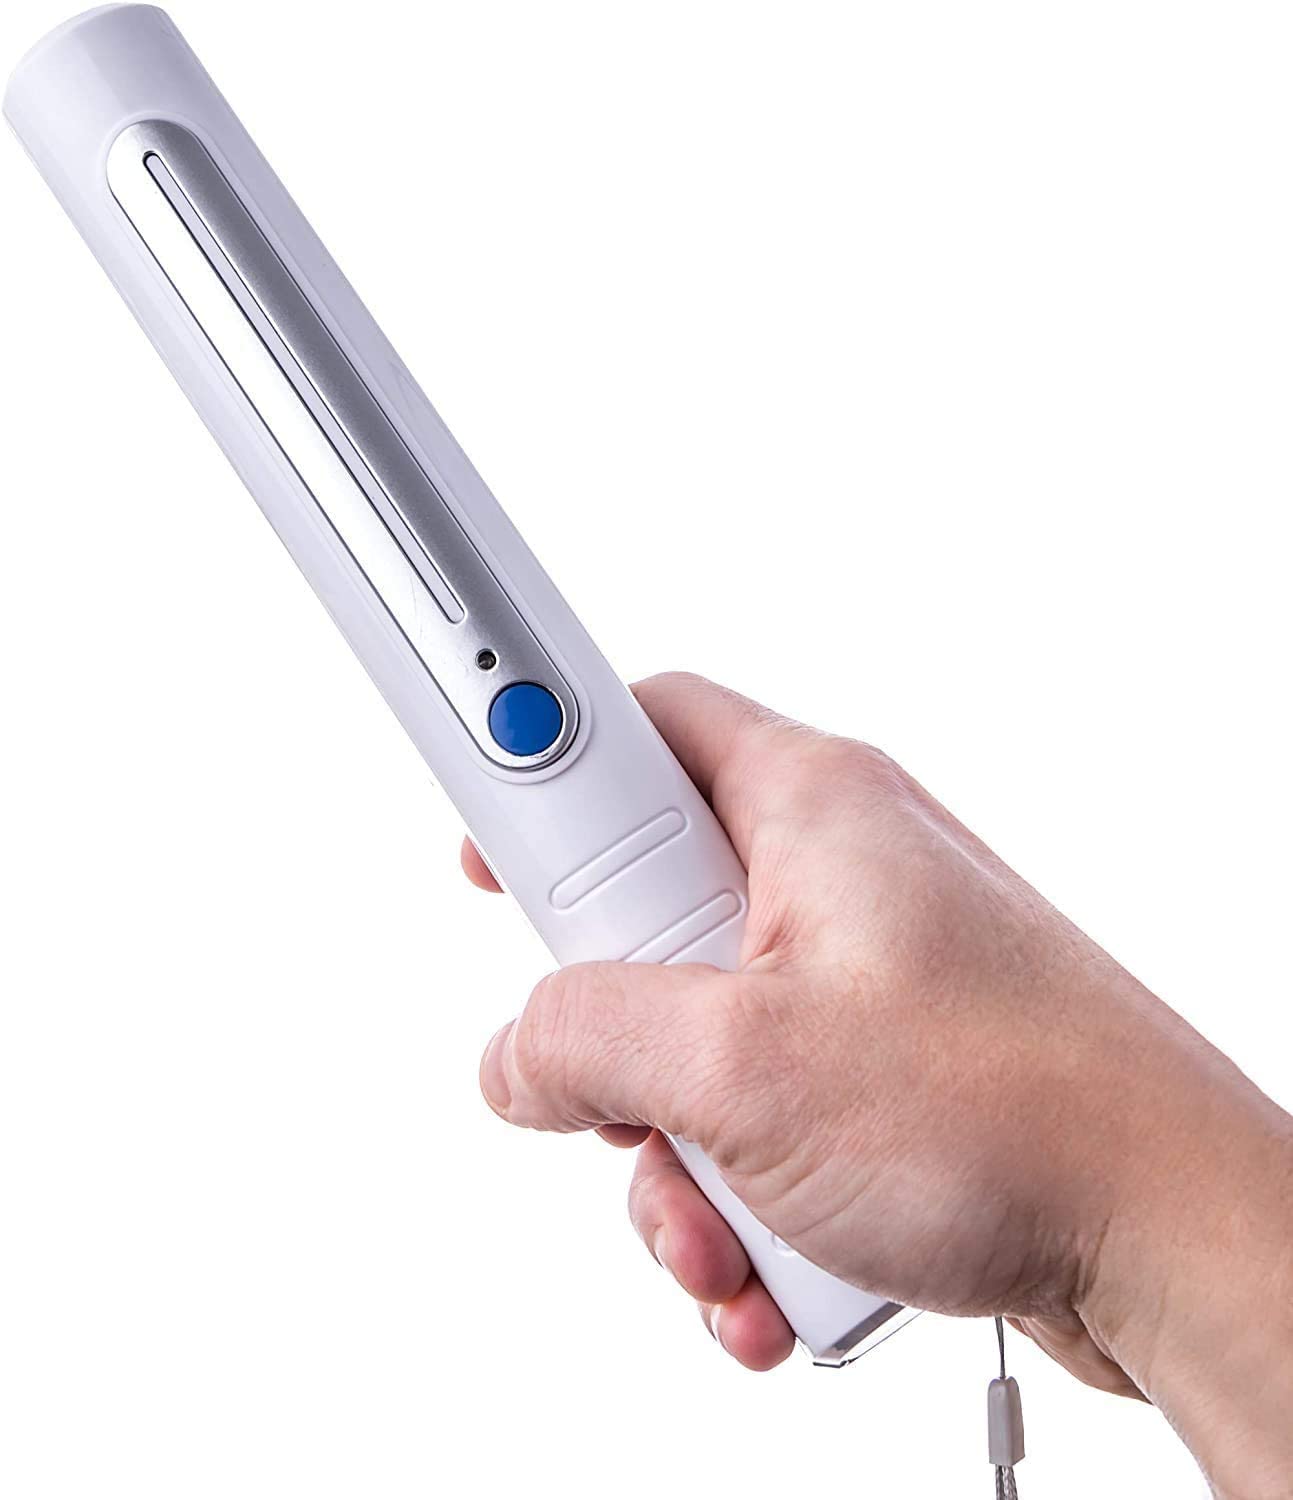 TRUE MARK UV Light Sanitizer Wand | Ultraviolet Light sanitizer | UV Wand sanitizer | Sterilizer Wand | Germicidal Disinfectant | Portable and Travel-Sized | Lab Tested